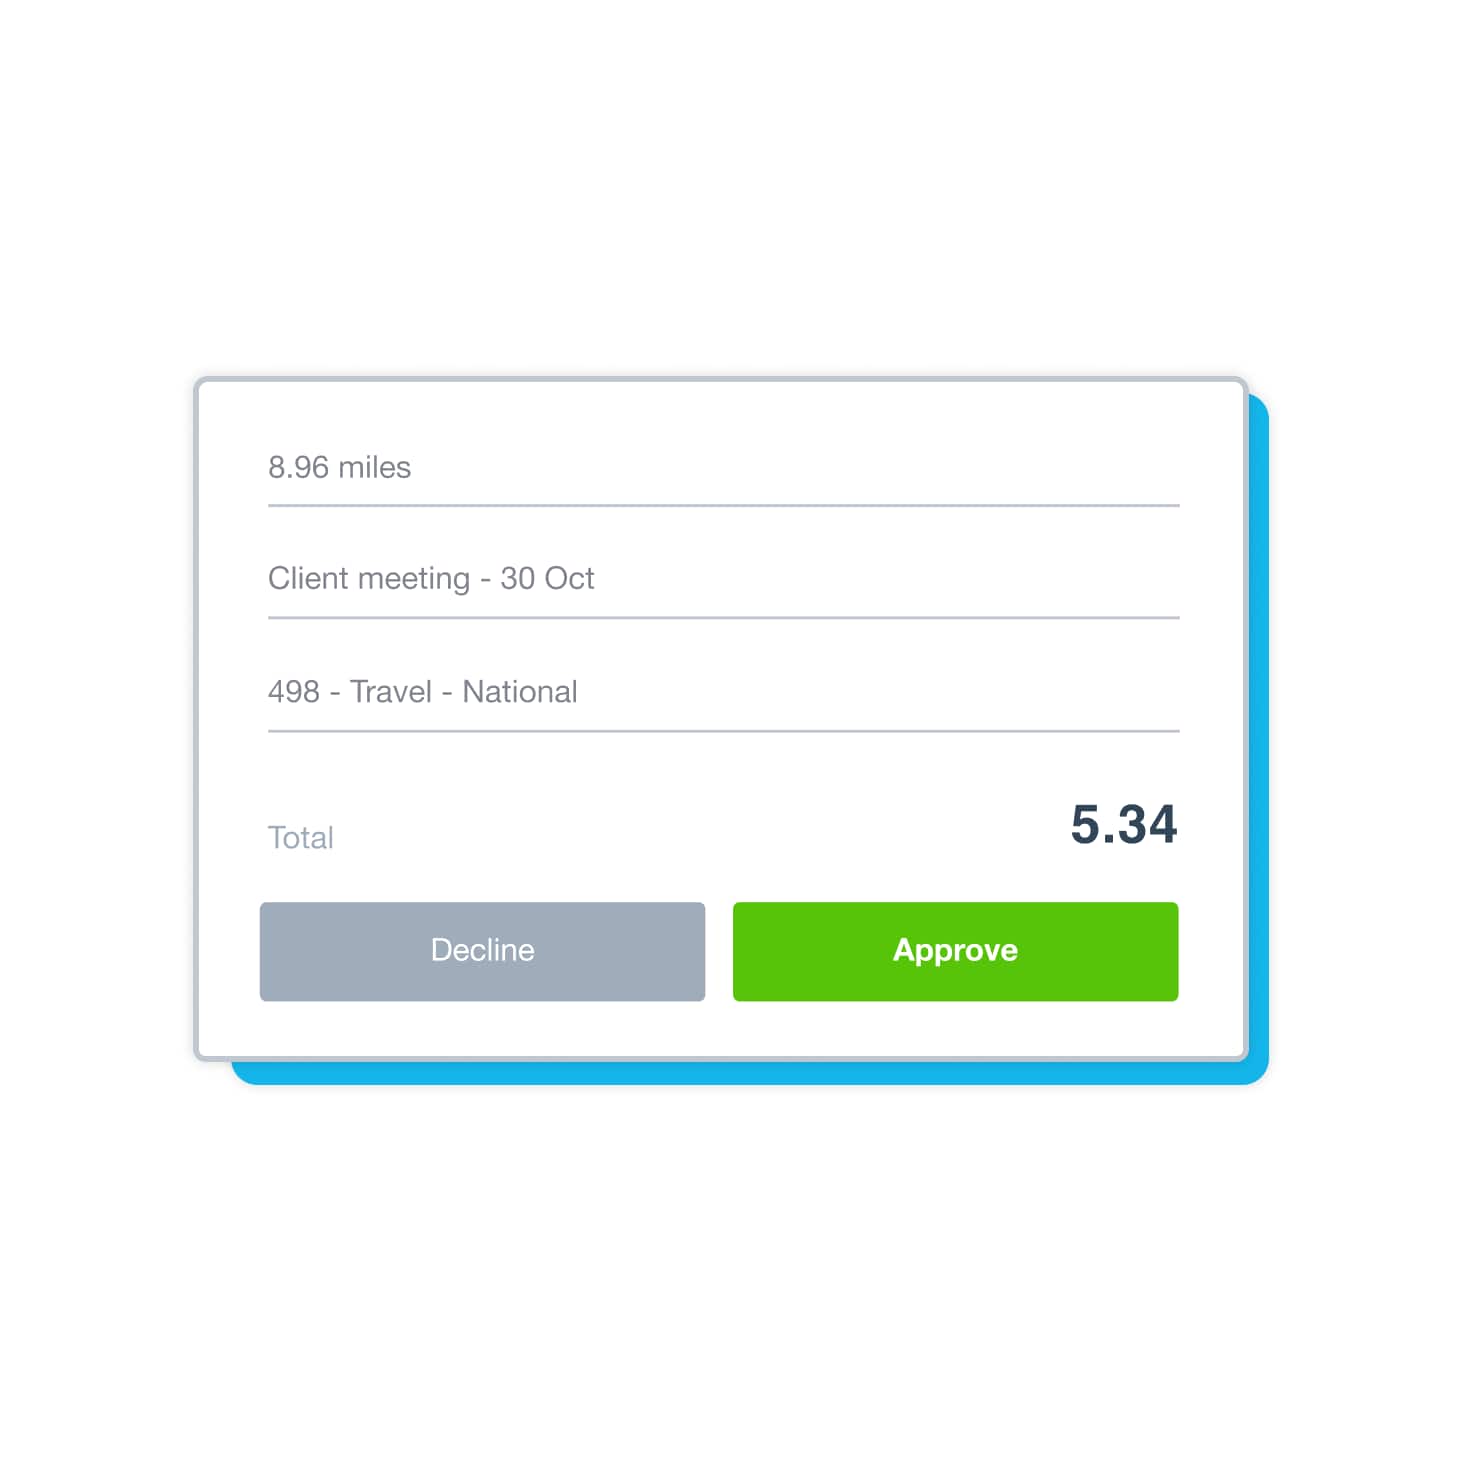 The Xero Me app shows details of a mileage claim for reimbursement, and lets you approve or decline the claim.